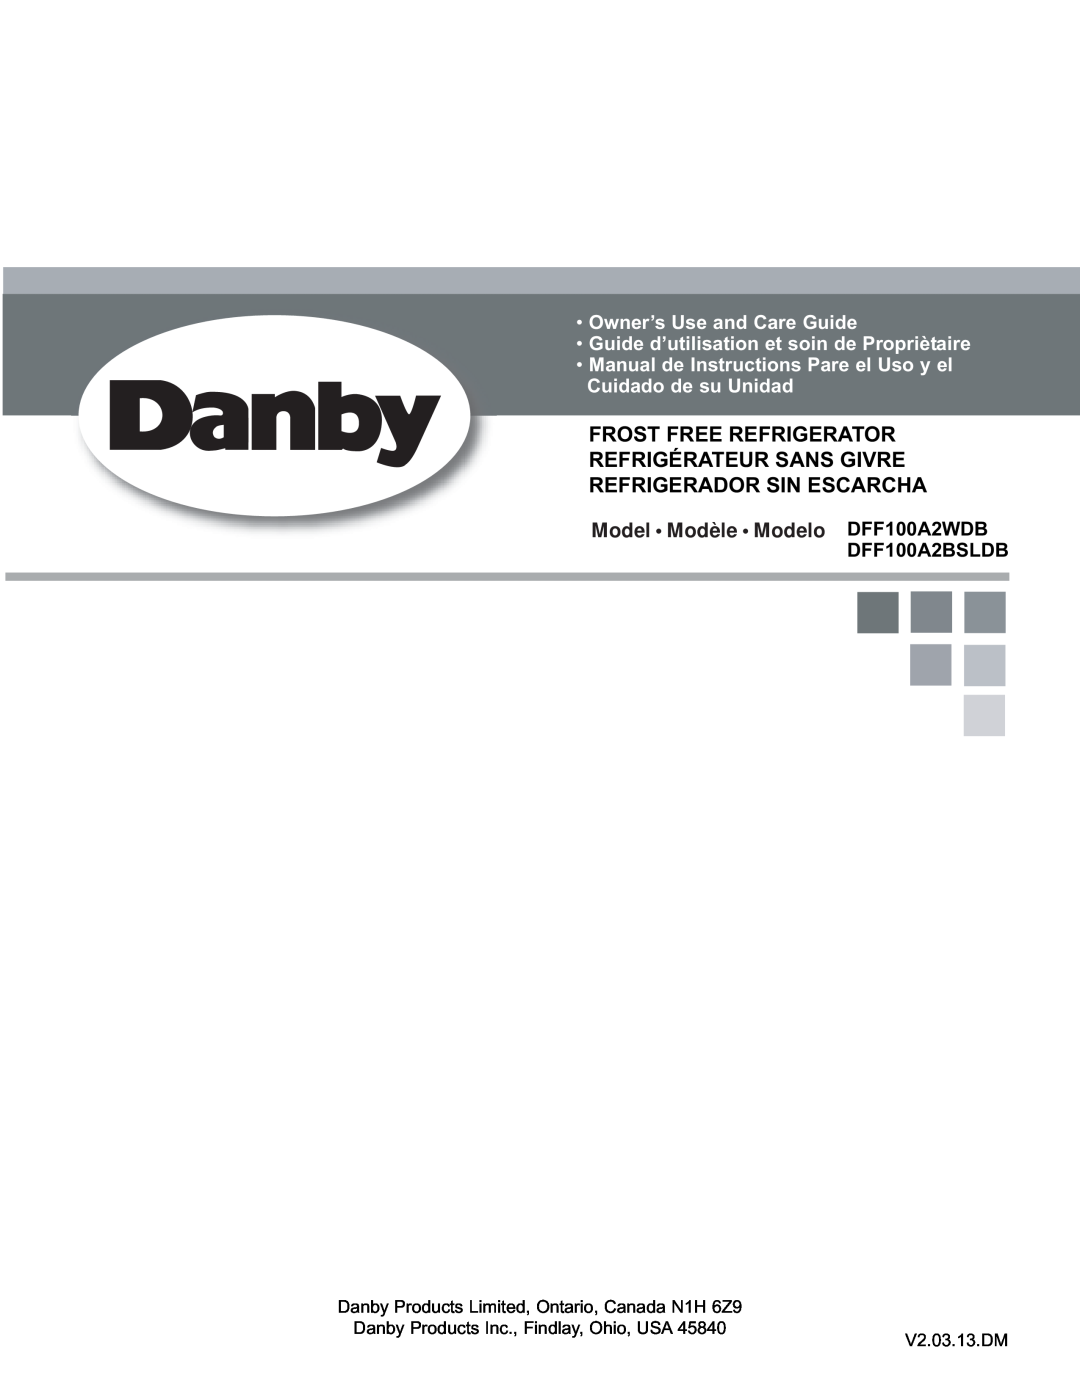 Danby manual Model Modèle Modelo DFF100A2WDB, DFF100A2BSLDB, Owner’s Use and Care Guide 